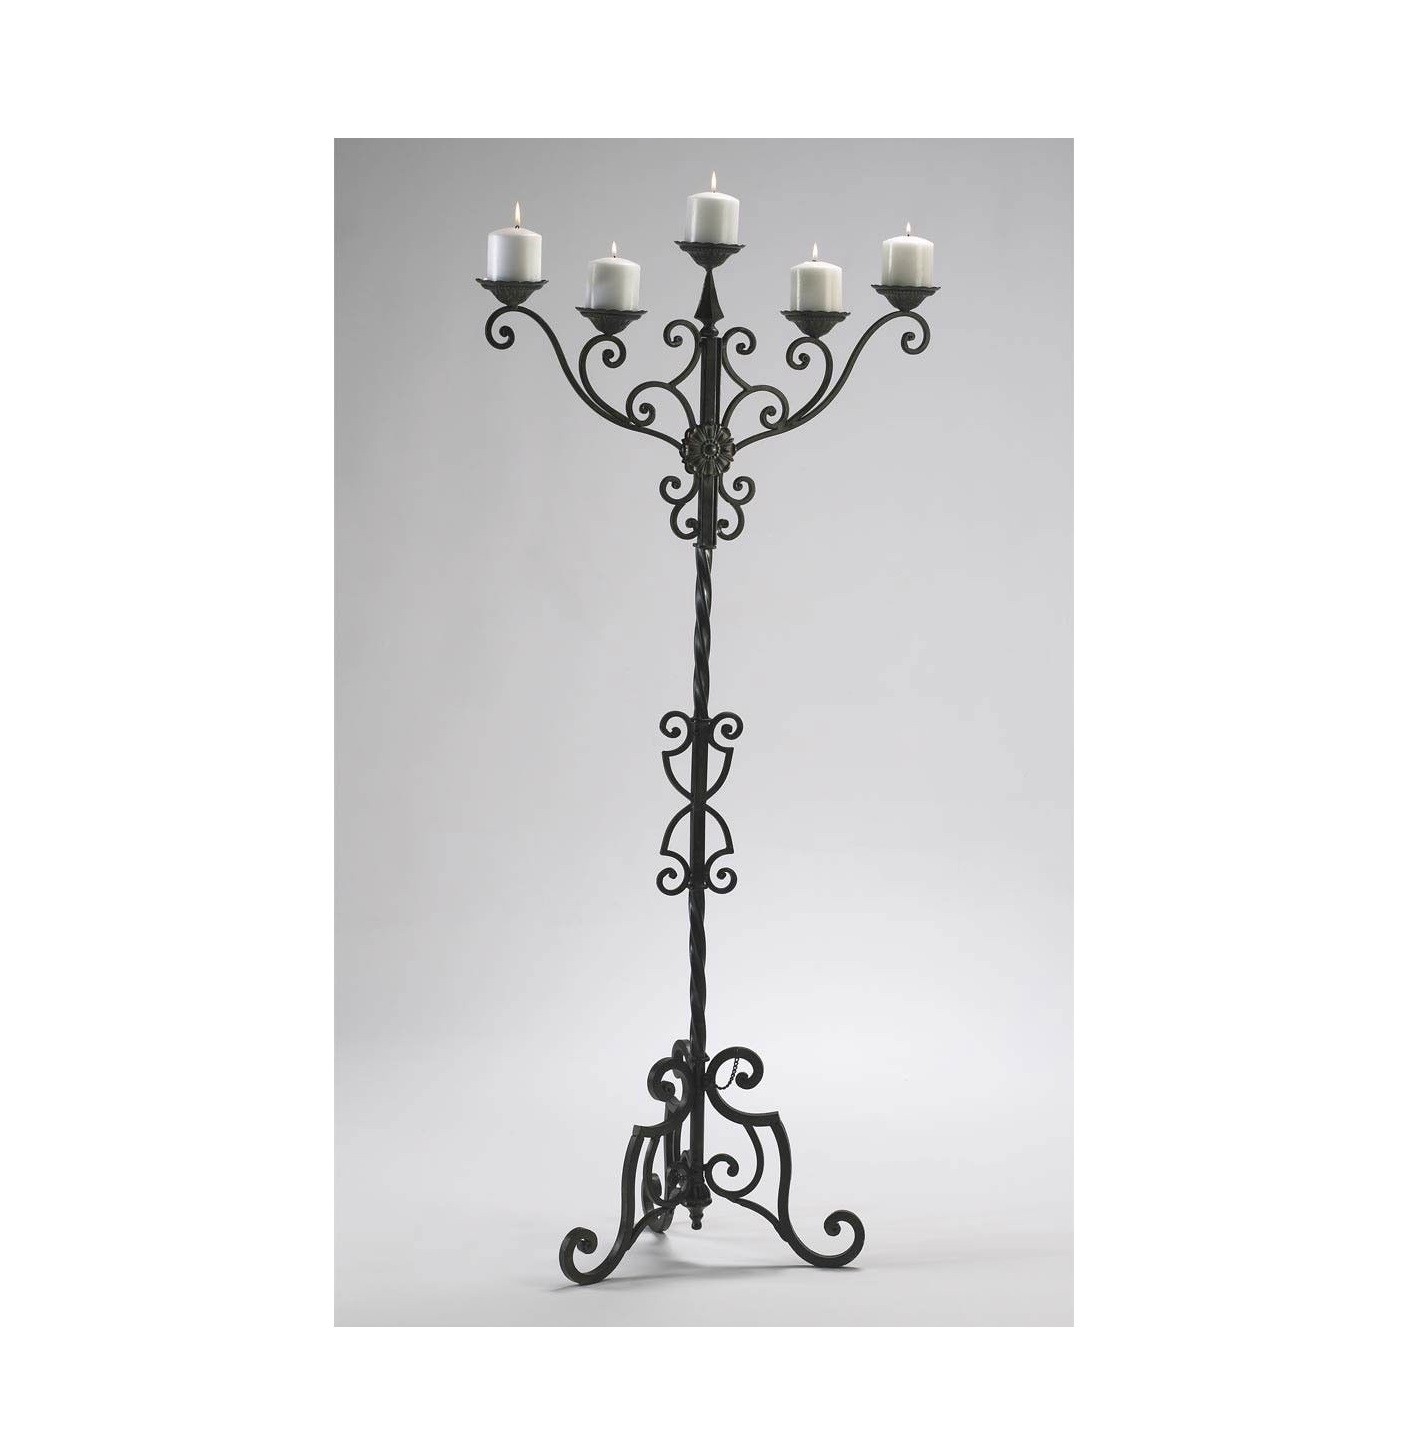 Floor candle holders wrought iron